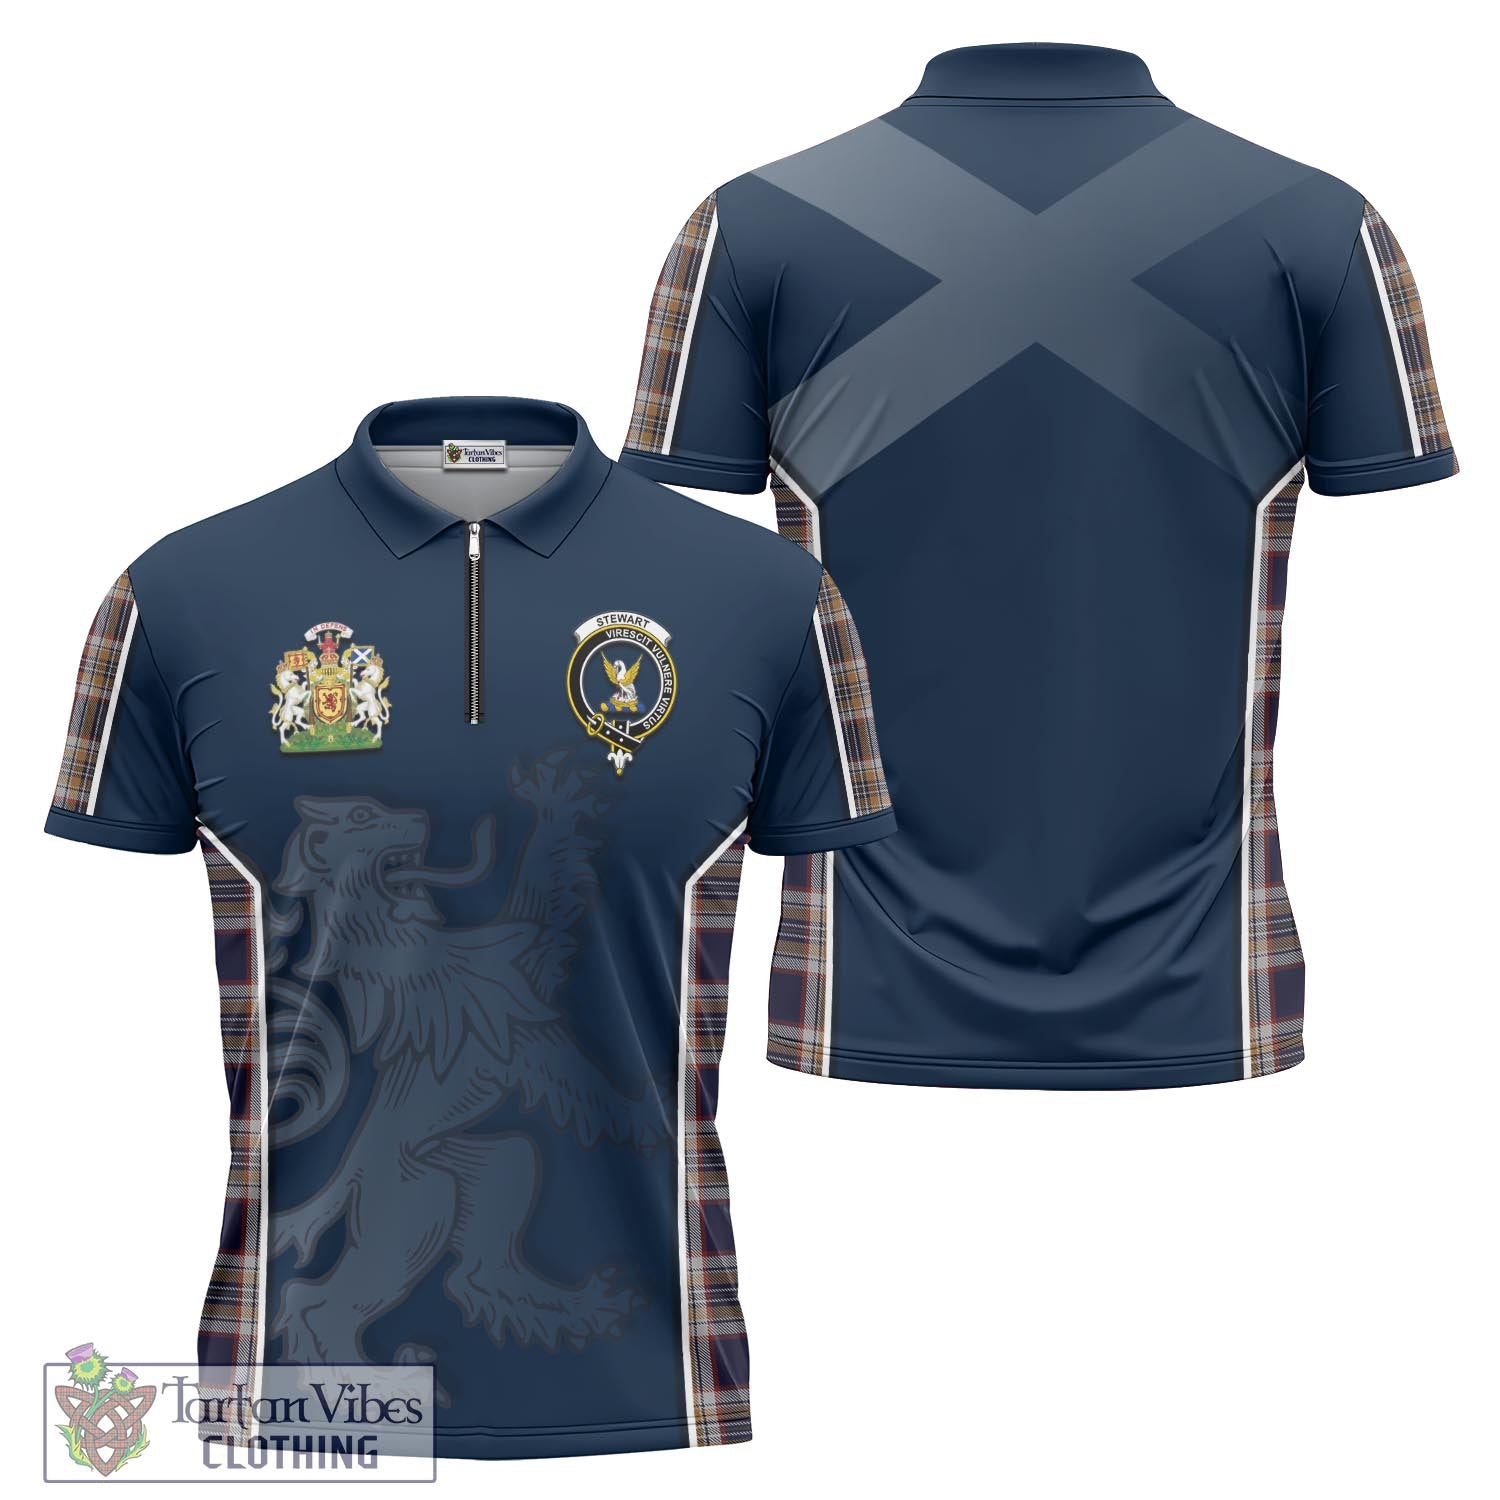 Tartan Vibes Clothing Stewart Navy Tartan Zipper Polo Shirt with Family Crest and Lion Rampant Vibes Sport Style